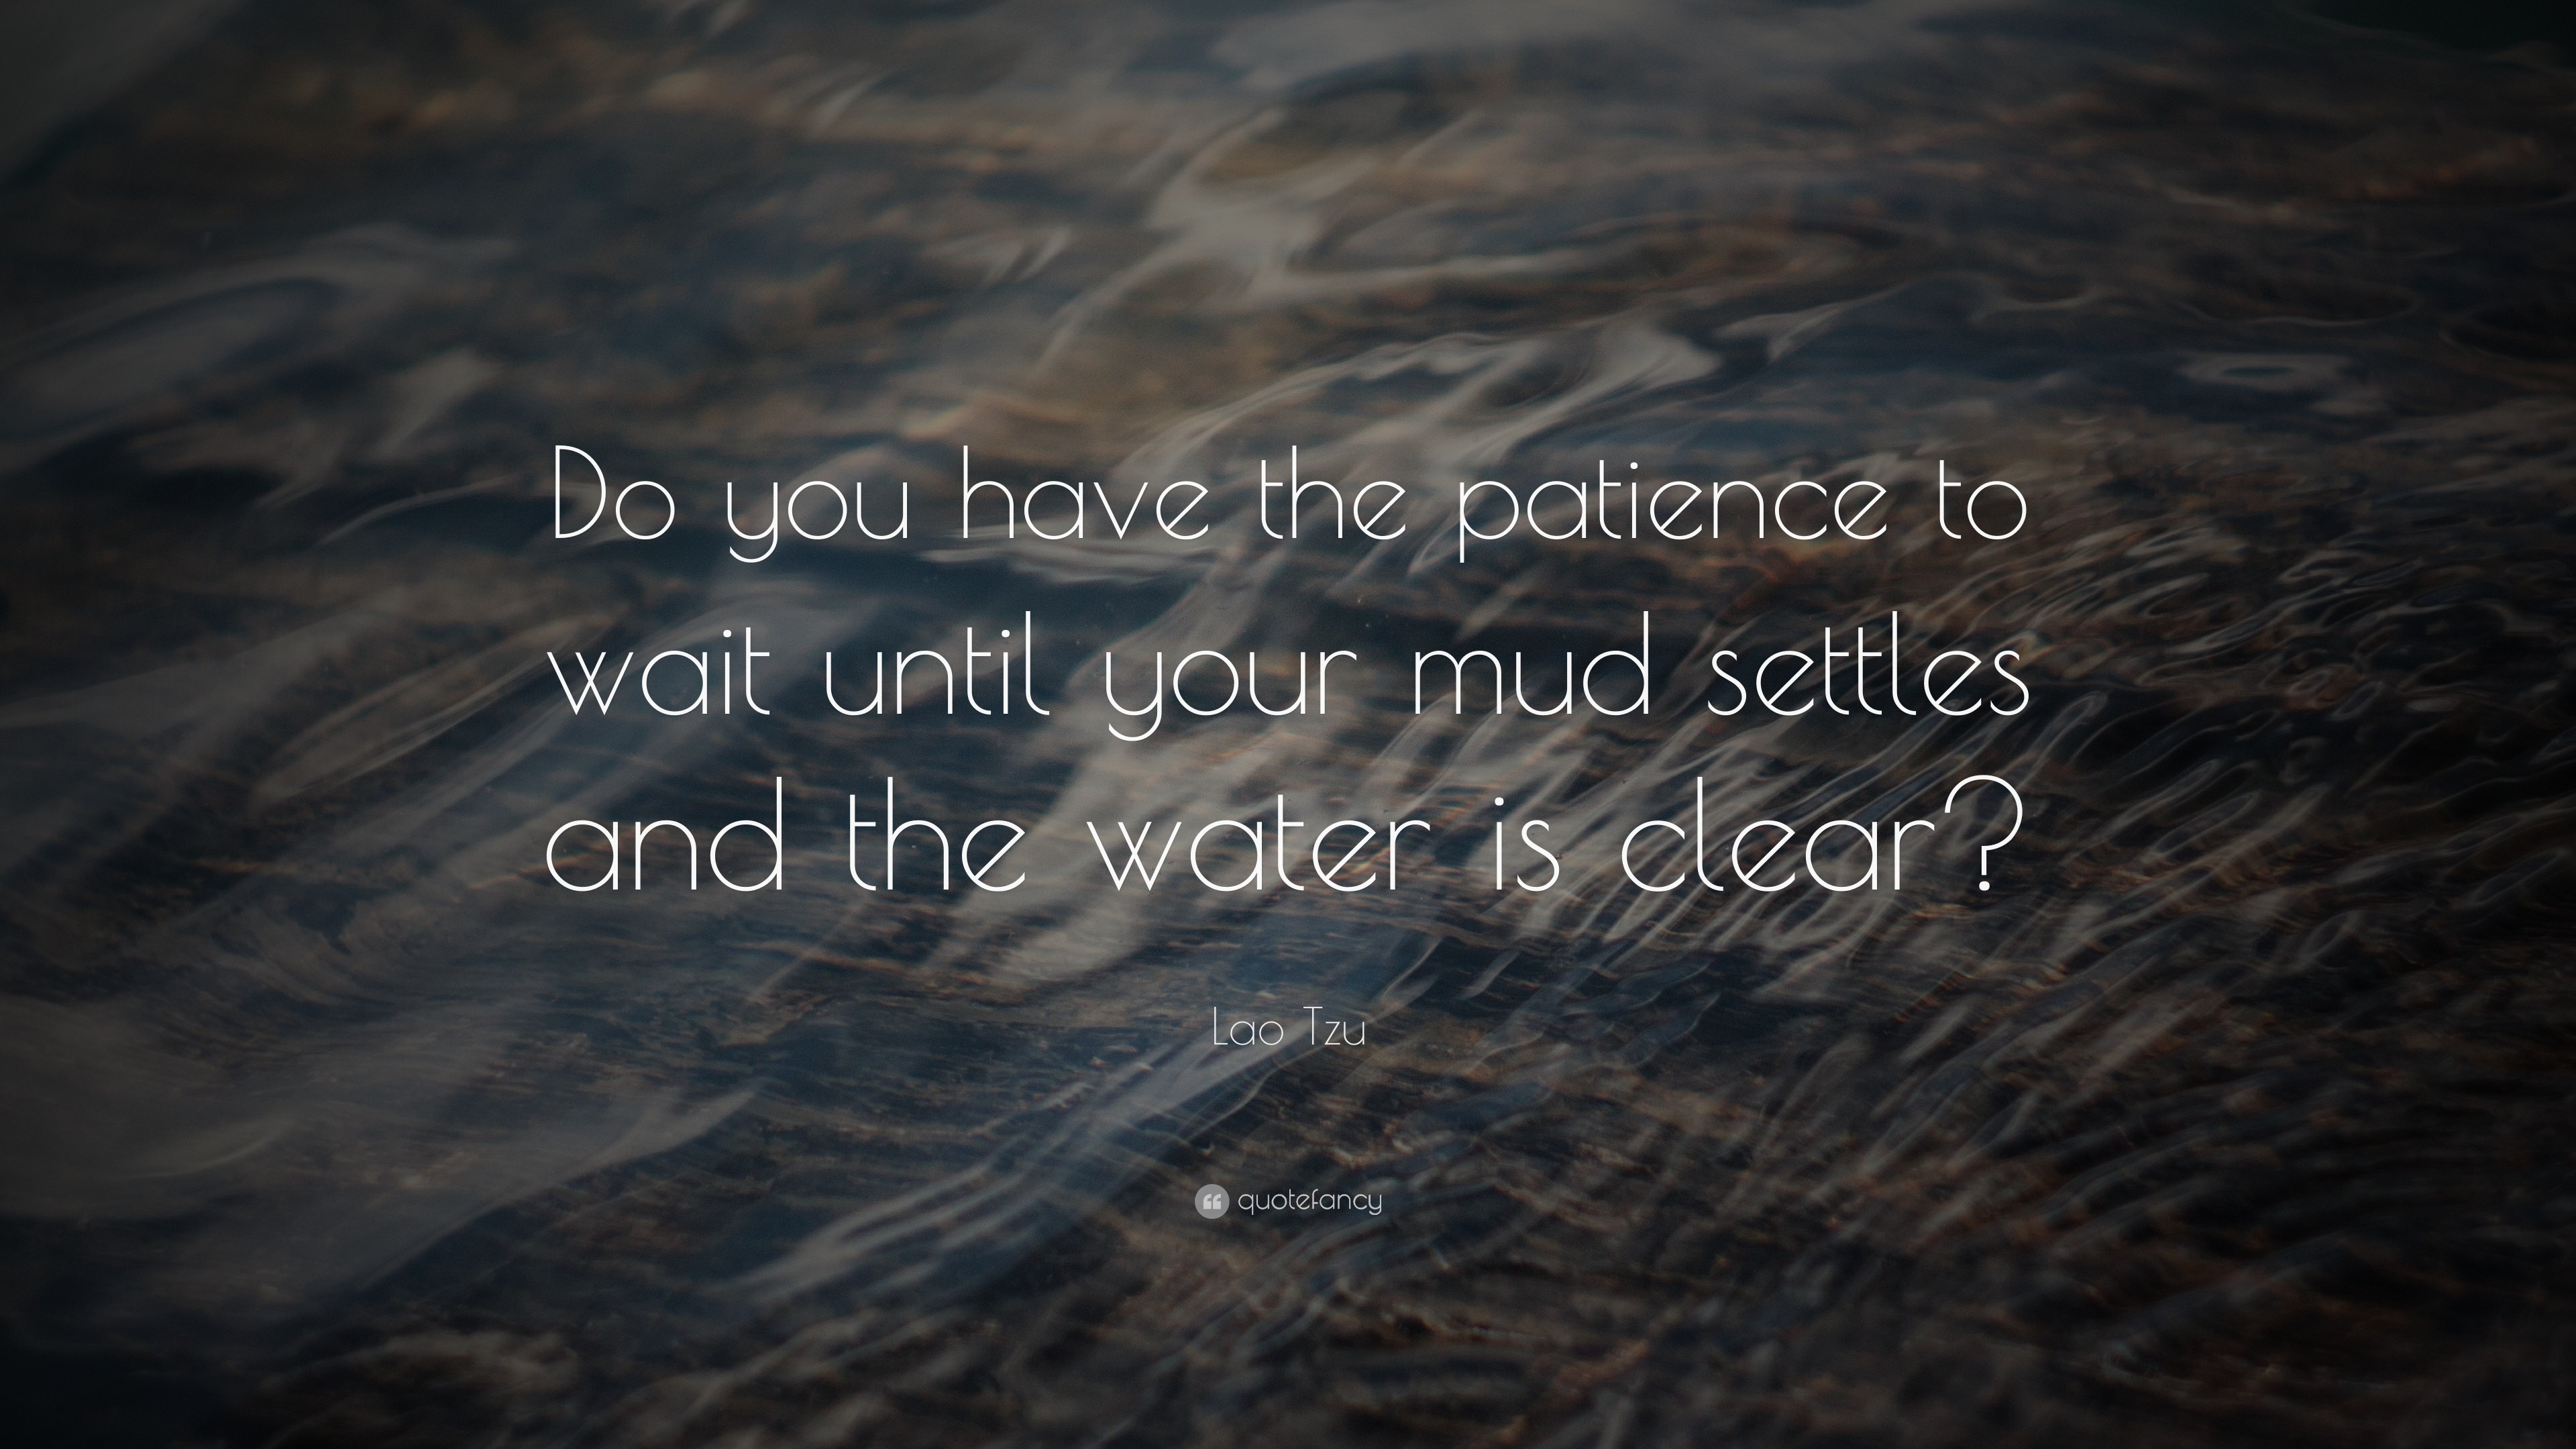 3840x2160 Lao Tzu Quote: “Do you have the patience to wait until your mud settles